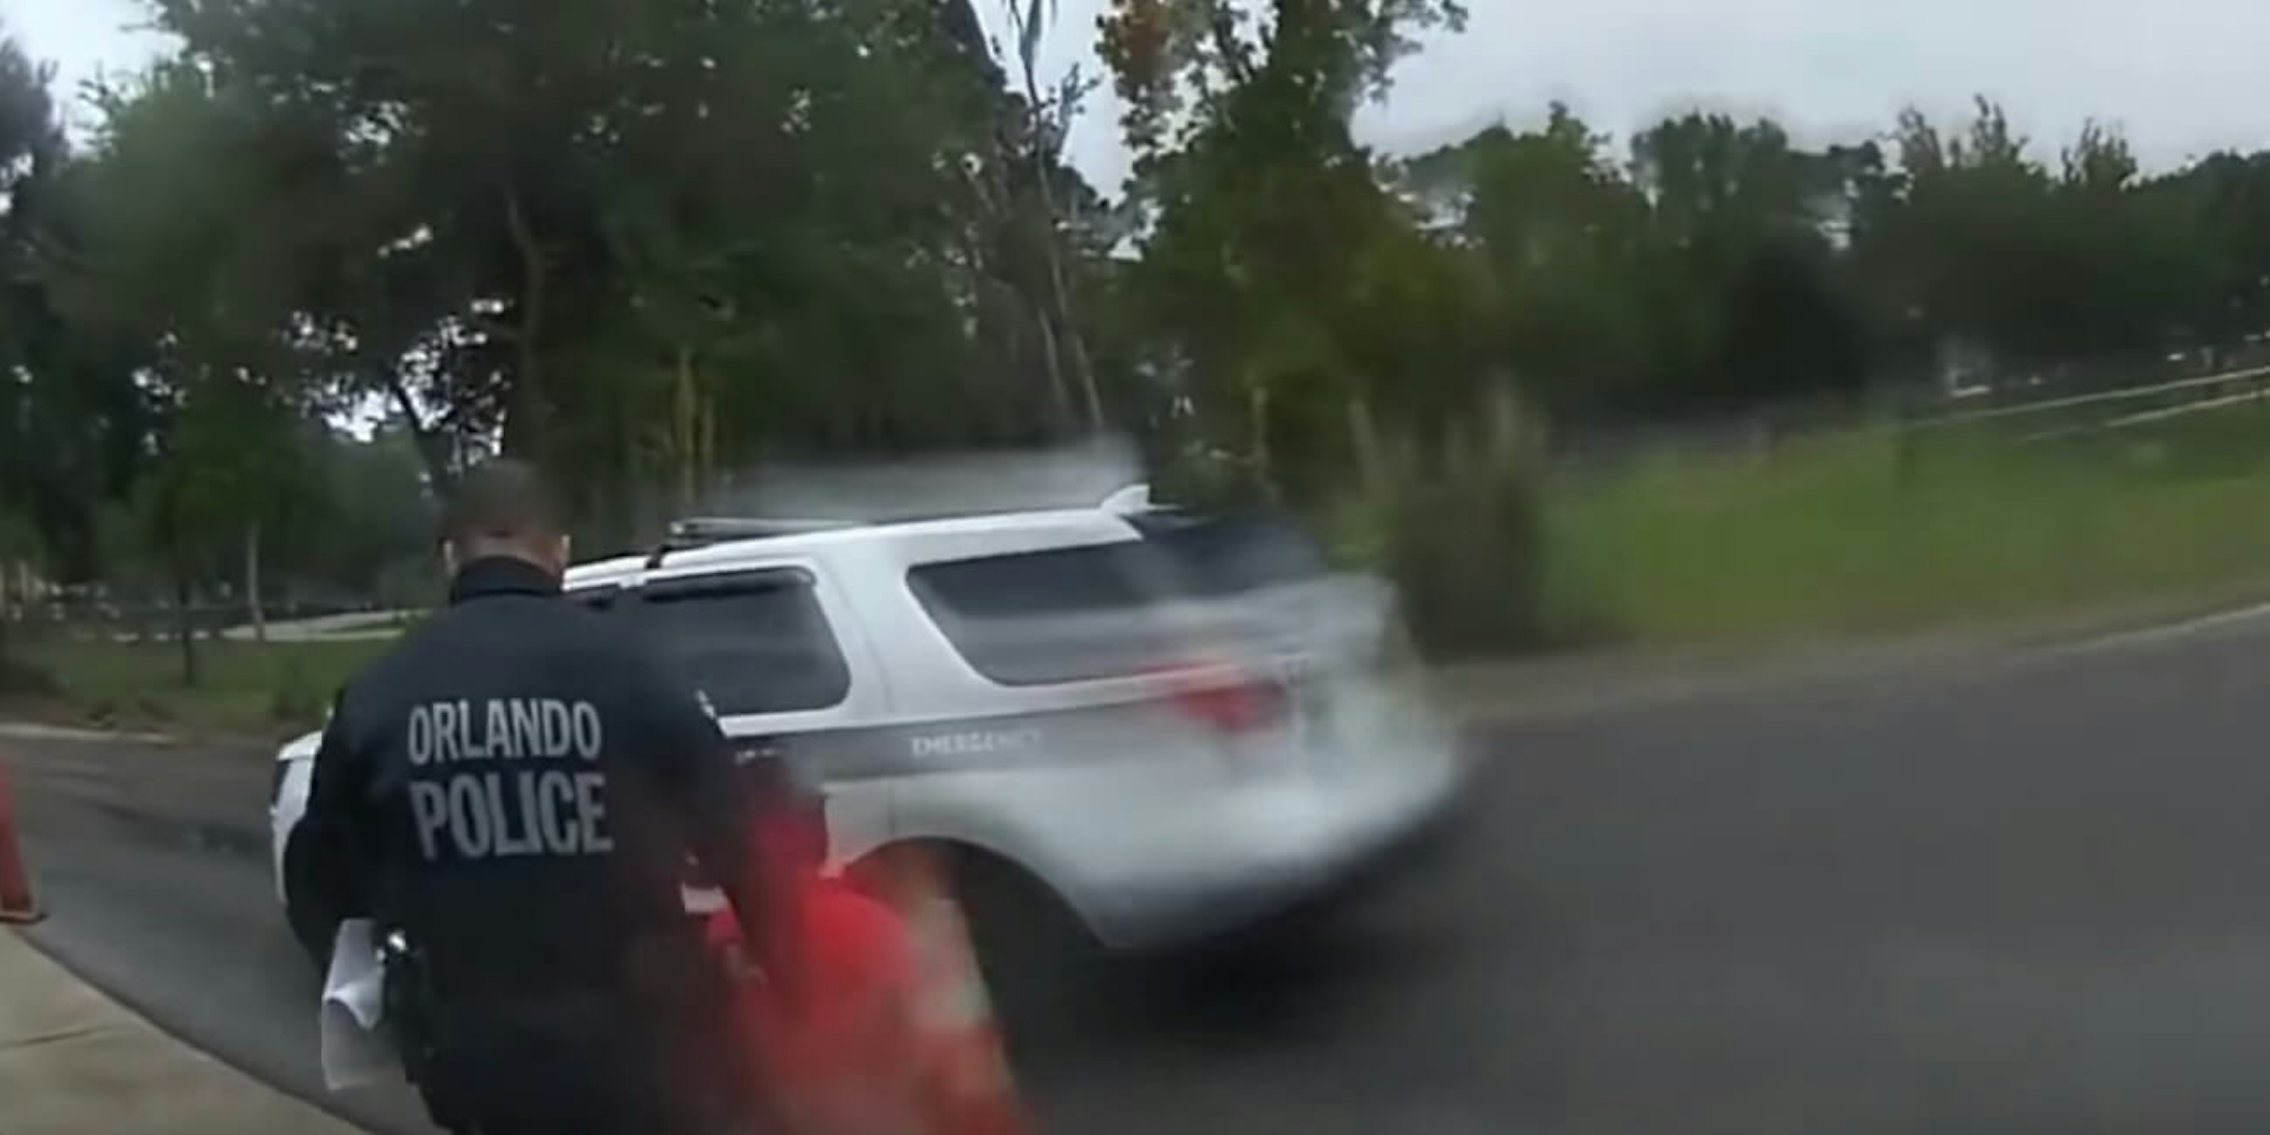 An Orlando officer is seen putting the wailing 6yo in the car